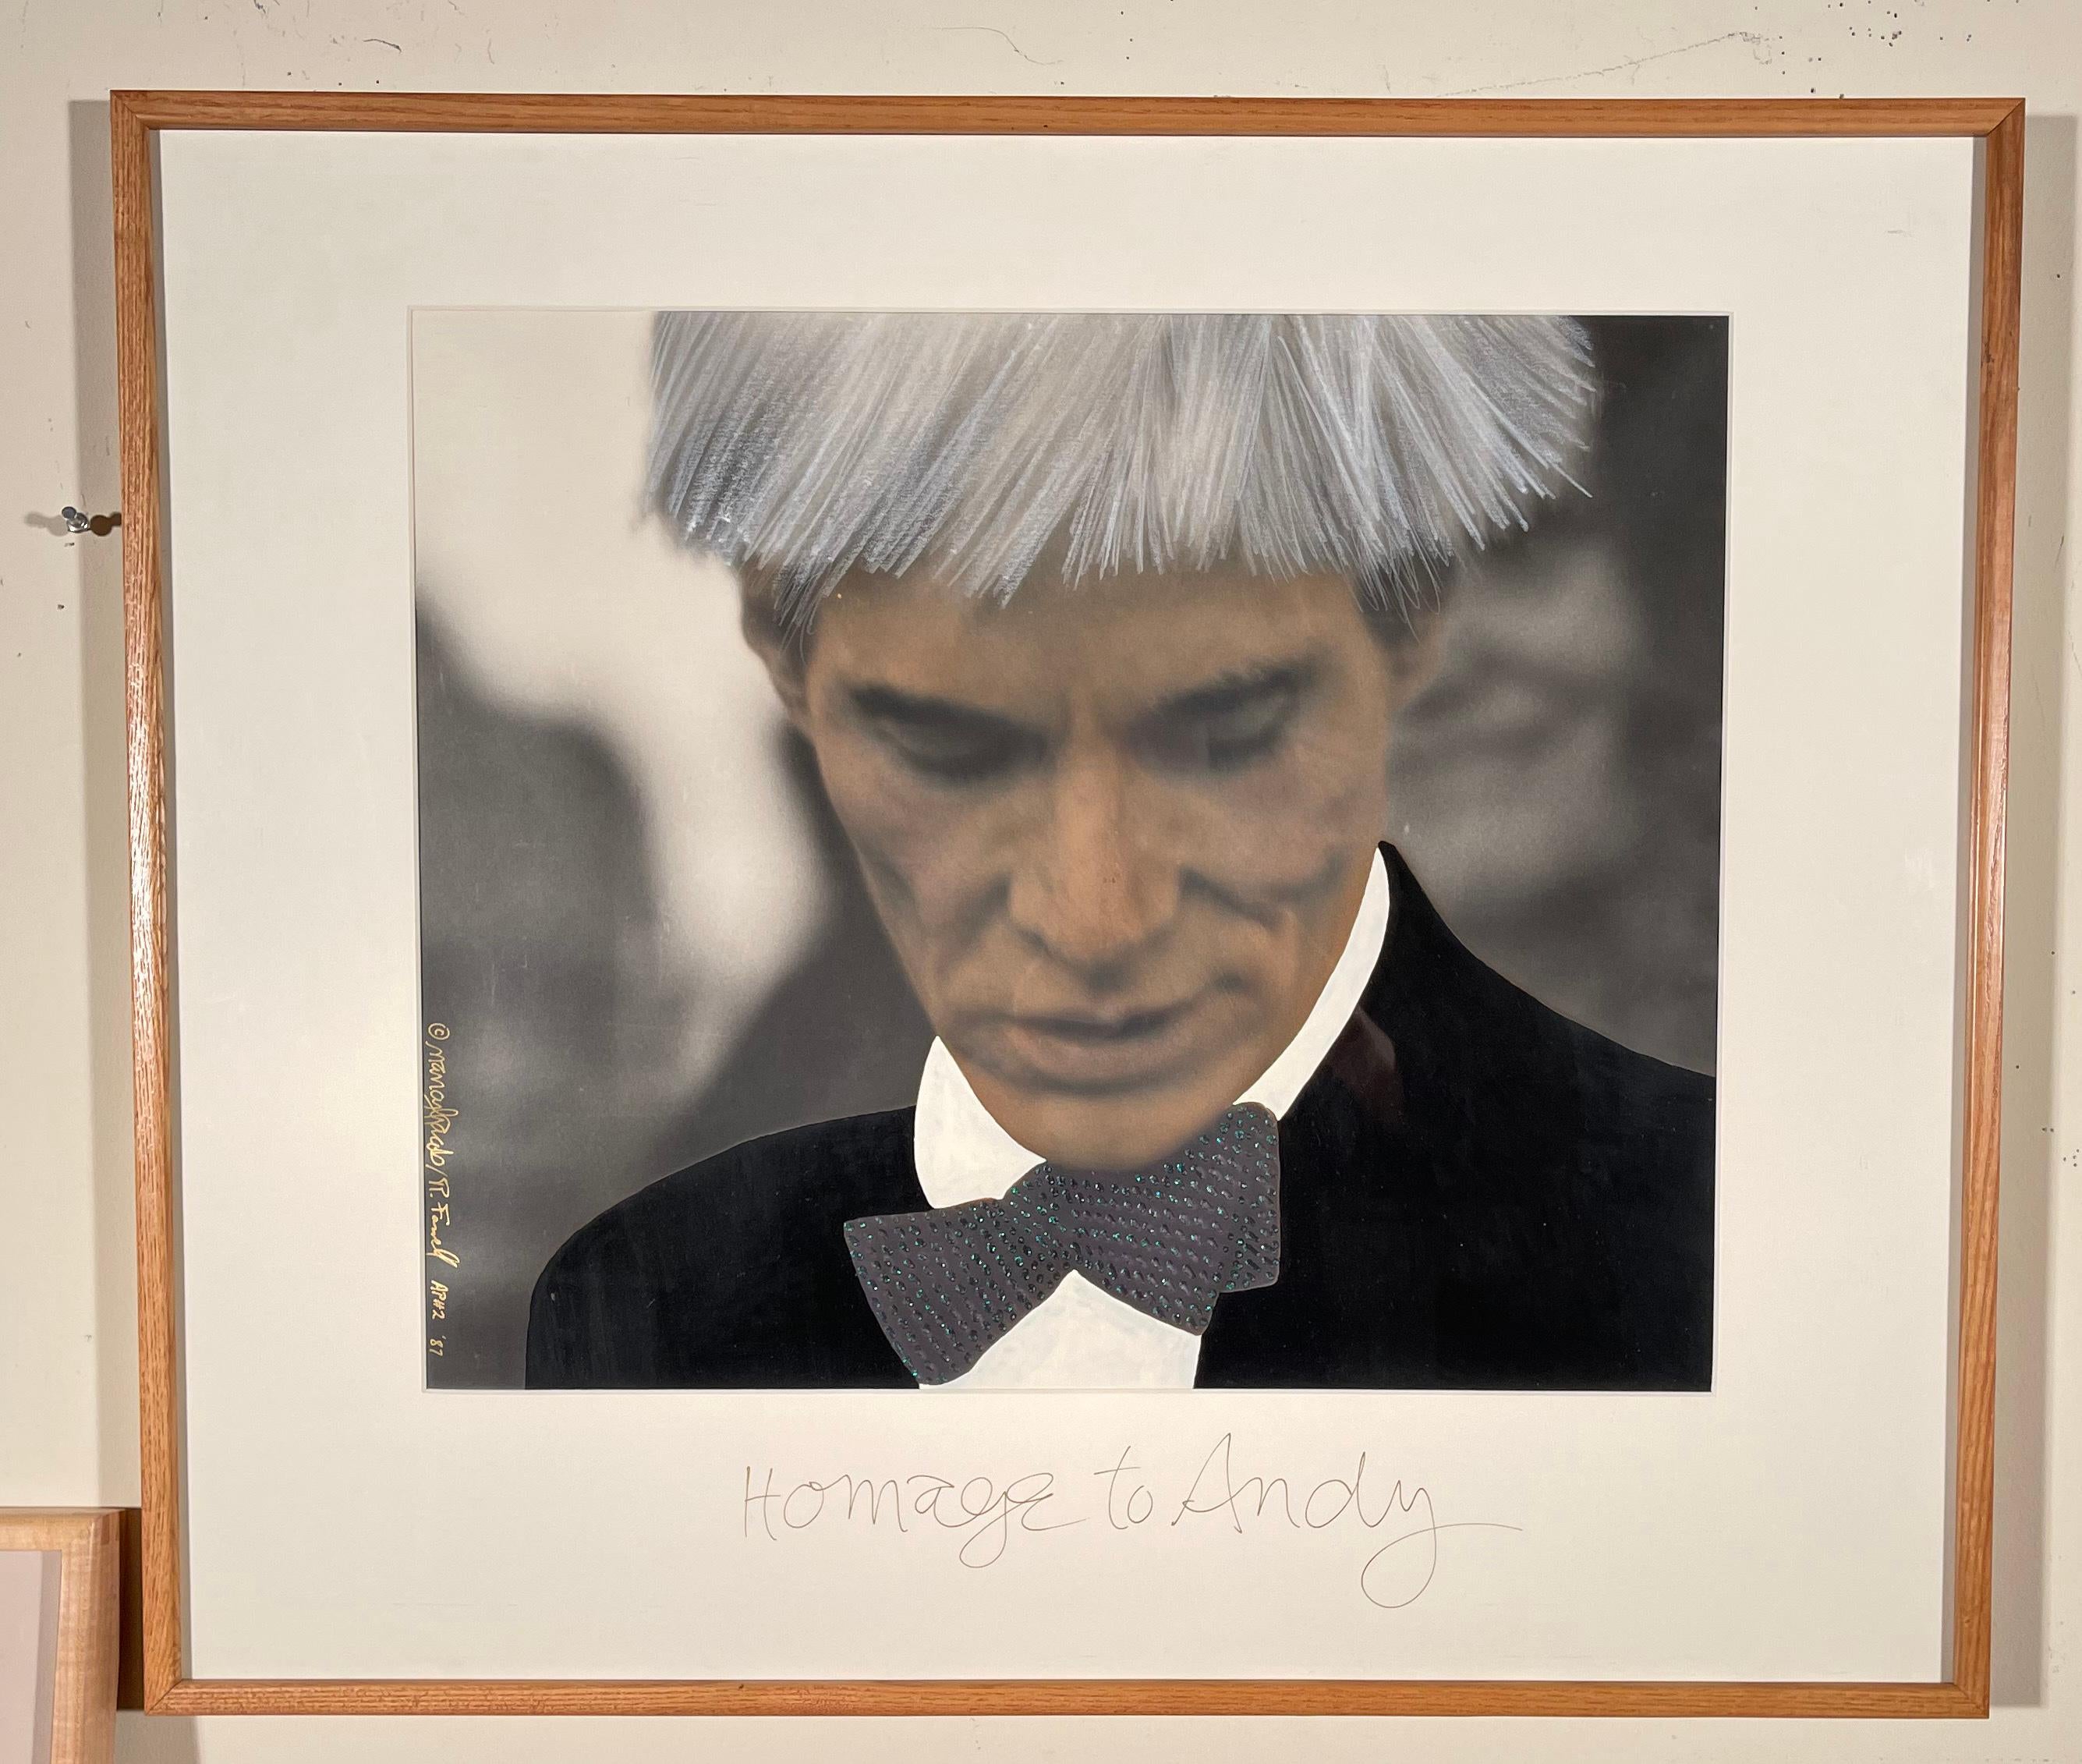 HOMAGE TO ANDY - PORTRAIT OF ANDY WARHOL - Photograph by Nancy Jacob